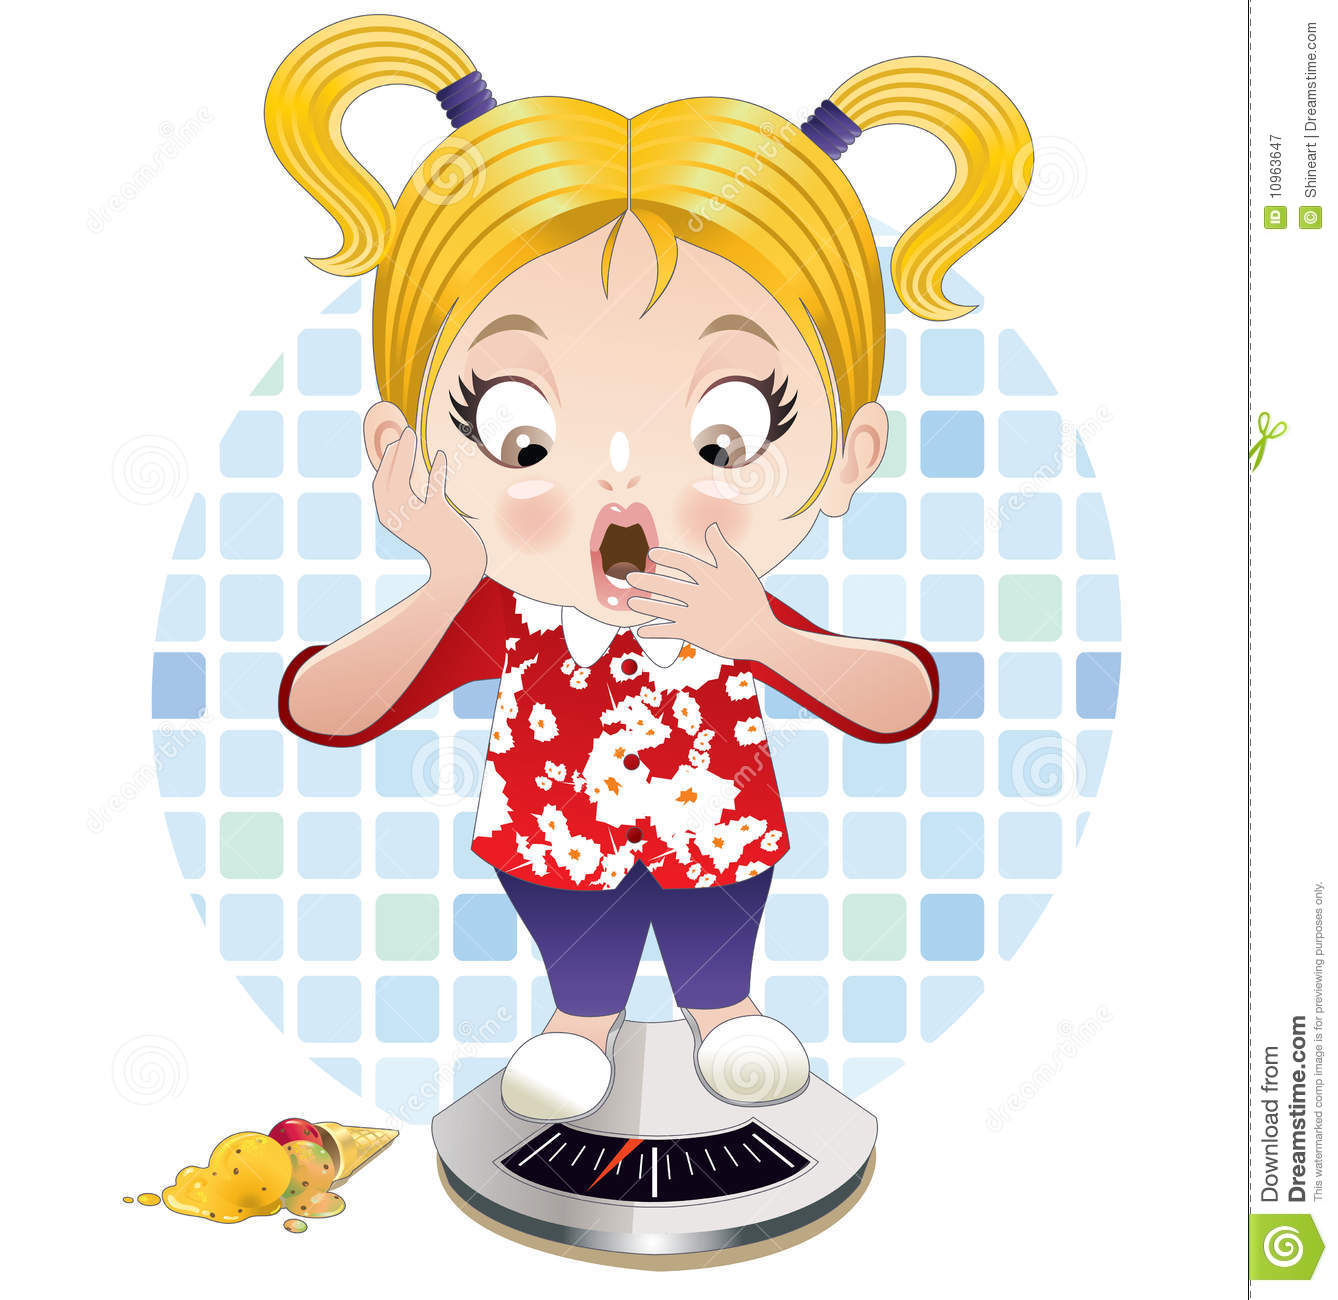 Girl Weighing Royalty Free Stock Photography   Image  10963647